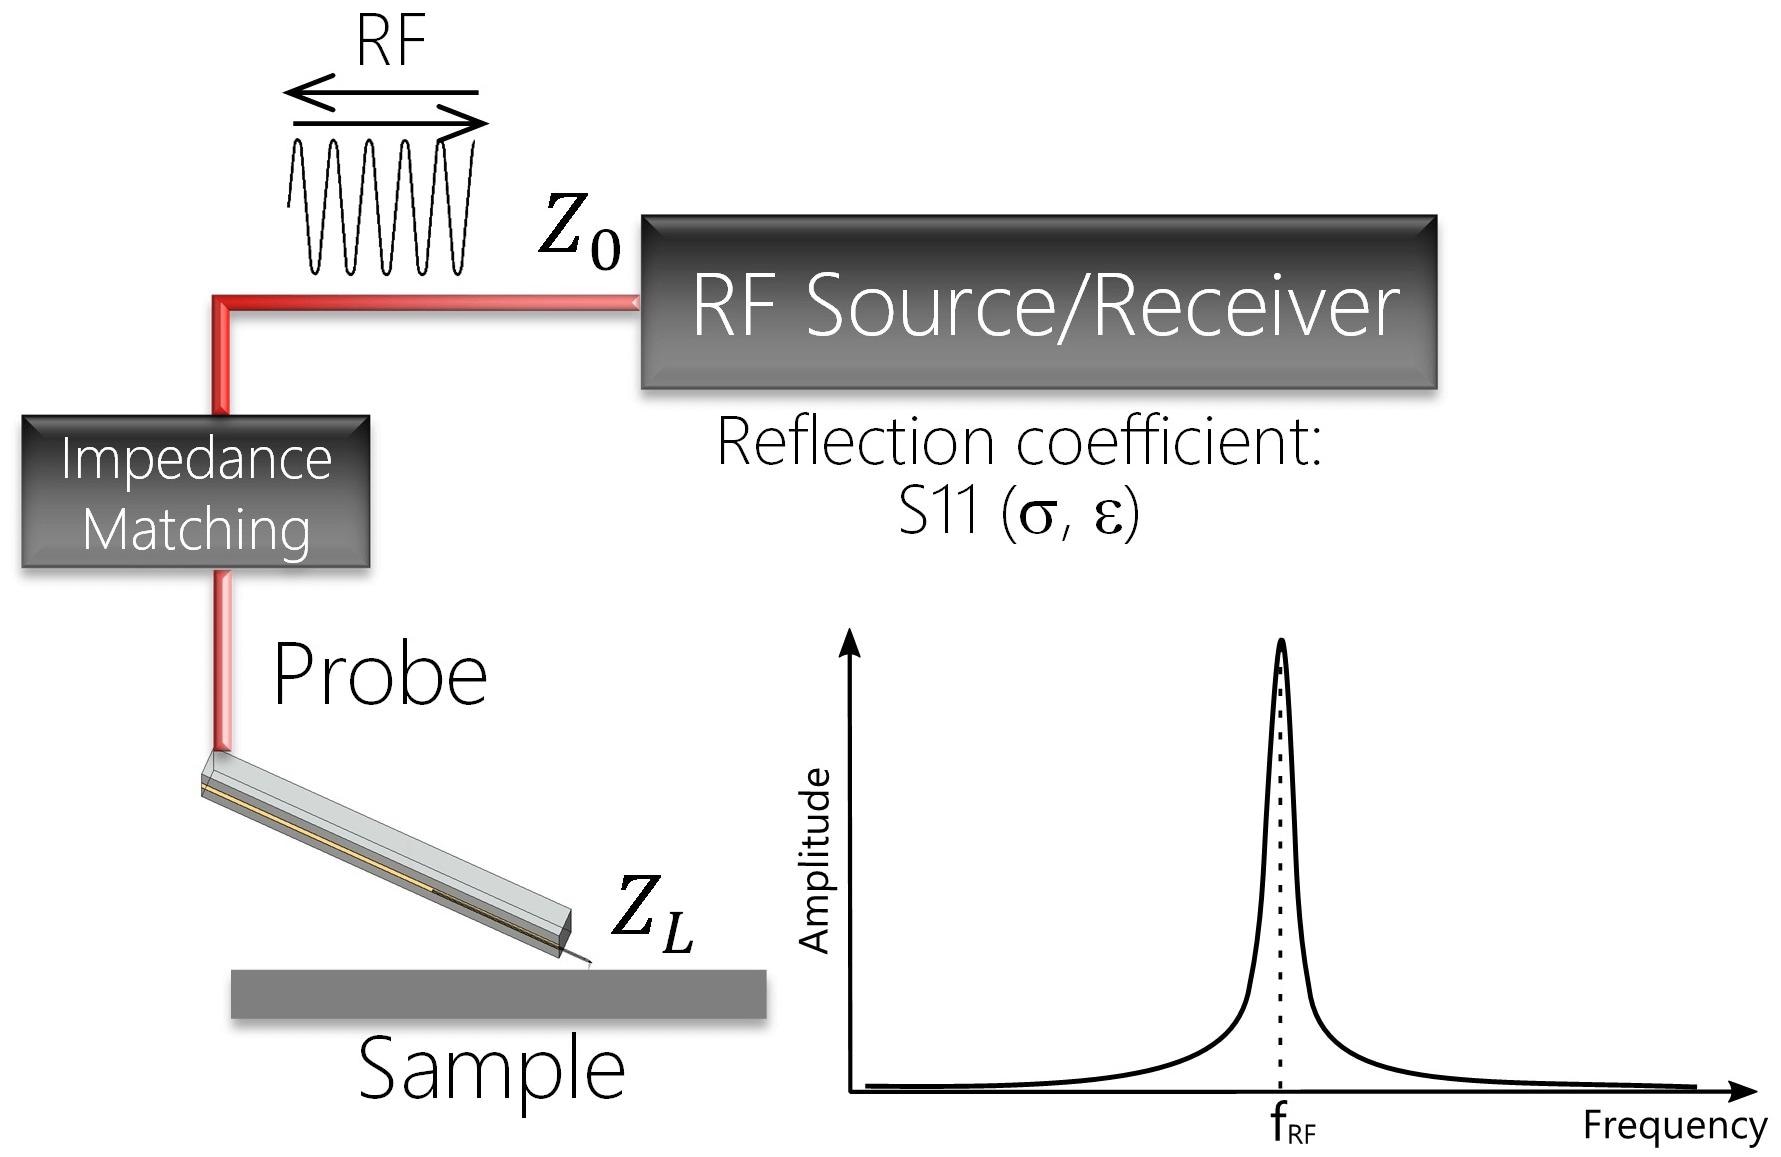 A schematic of a typical SMM setup: RF source/receiver electronics send the RF wave with impedance Z0 through the transmission line to the probe (red). The sample-probe impedance is ZL. The impedance matching circuit works as an “anti-reflection” medium between the low impedance Z0 and high impedance ZL. There is only one frequency peak (fRF) in the spectrum and the amplitude and/or phase are tracked during scanning of the surface.